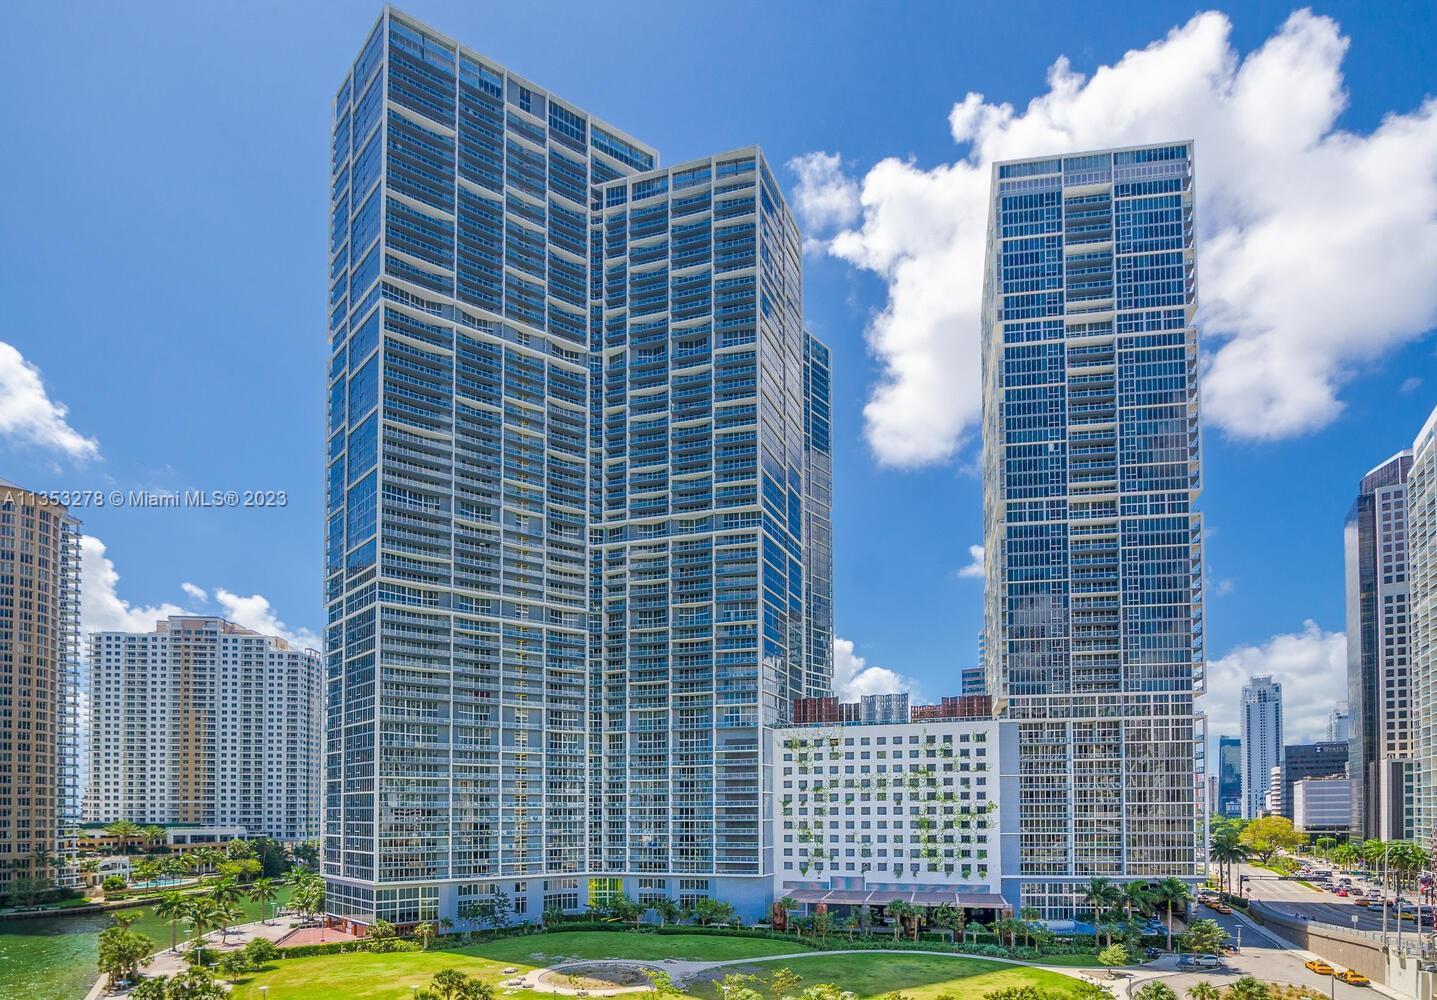 Located in the heart of Brickell/Downtown this 1 bedroom 1 bathroom condo is tastefully furnished an